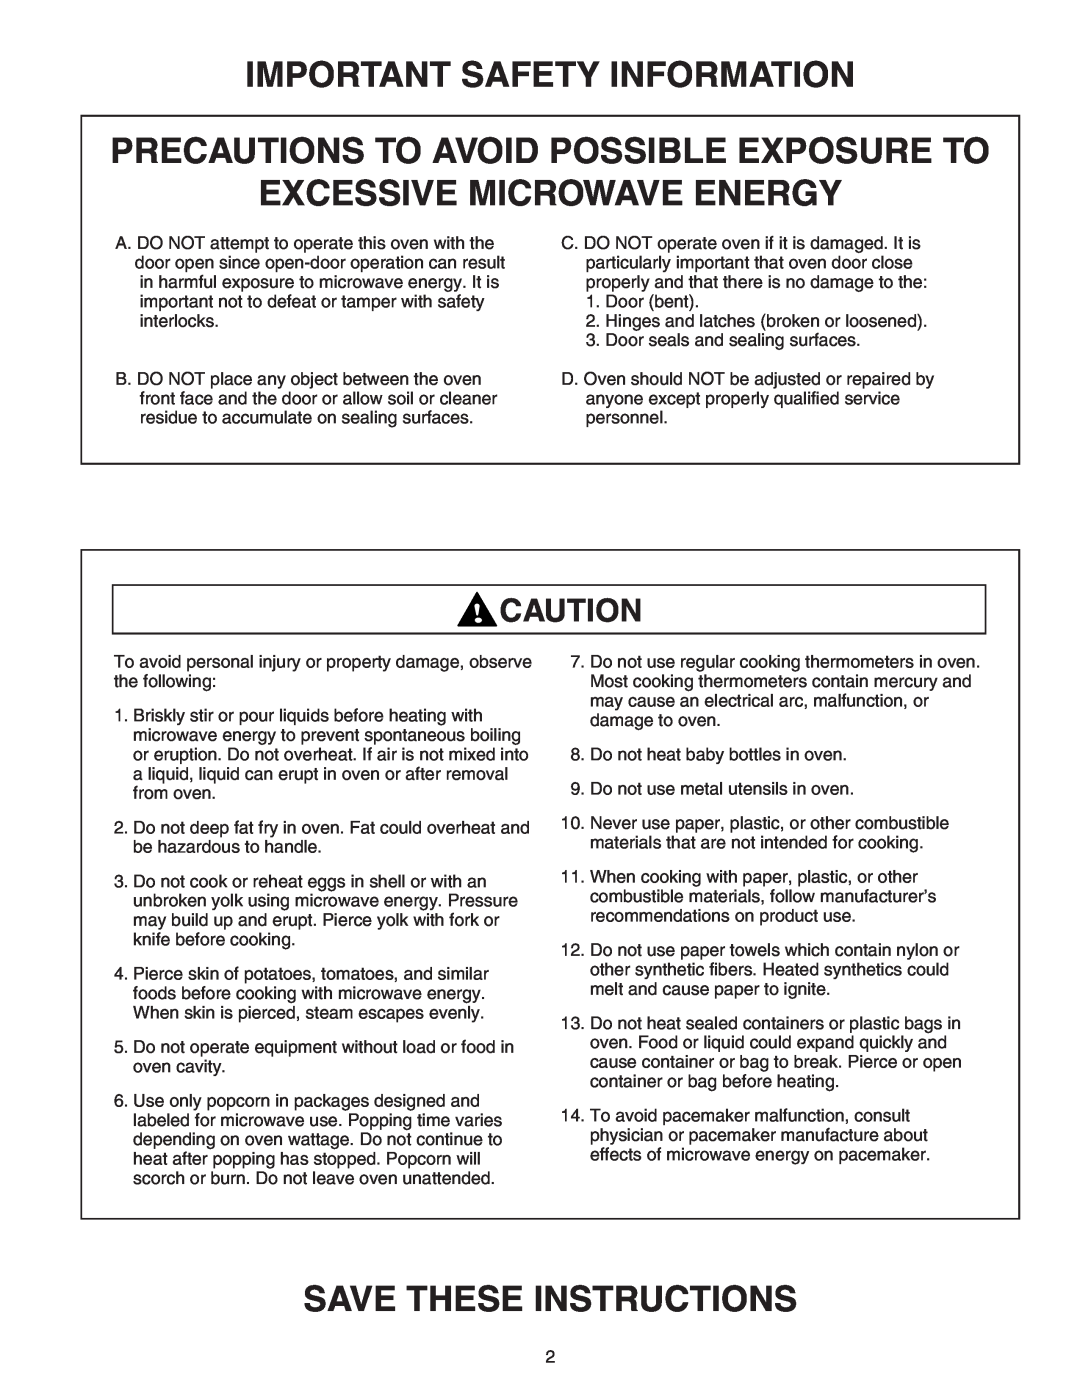 Maytag 8101P641-60 Important Safety Information, Precautions To Avoid Possible Exposure To Excessive Microwave Energy 